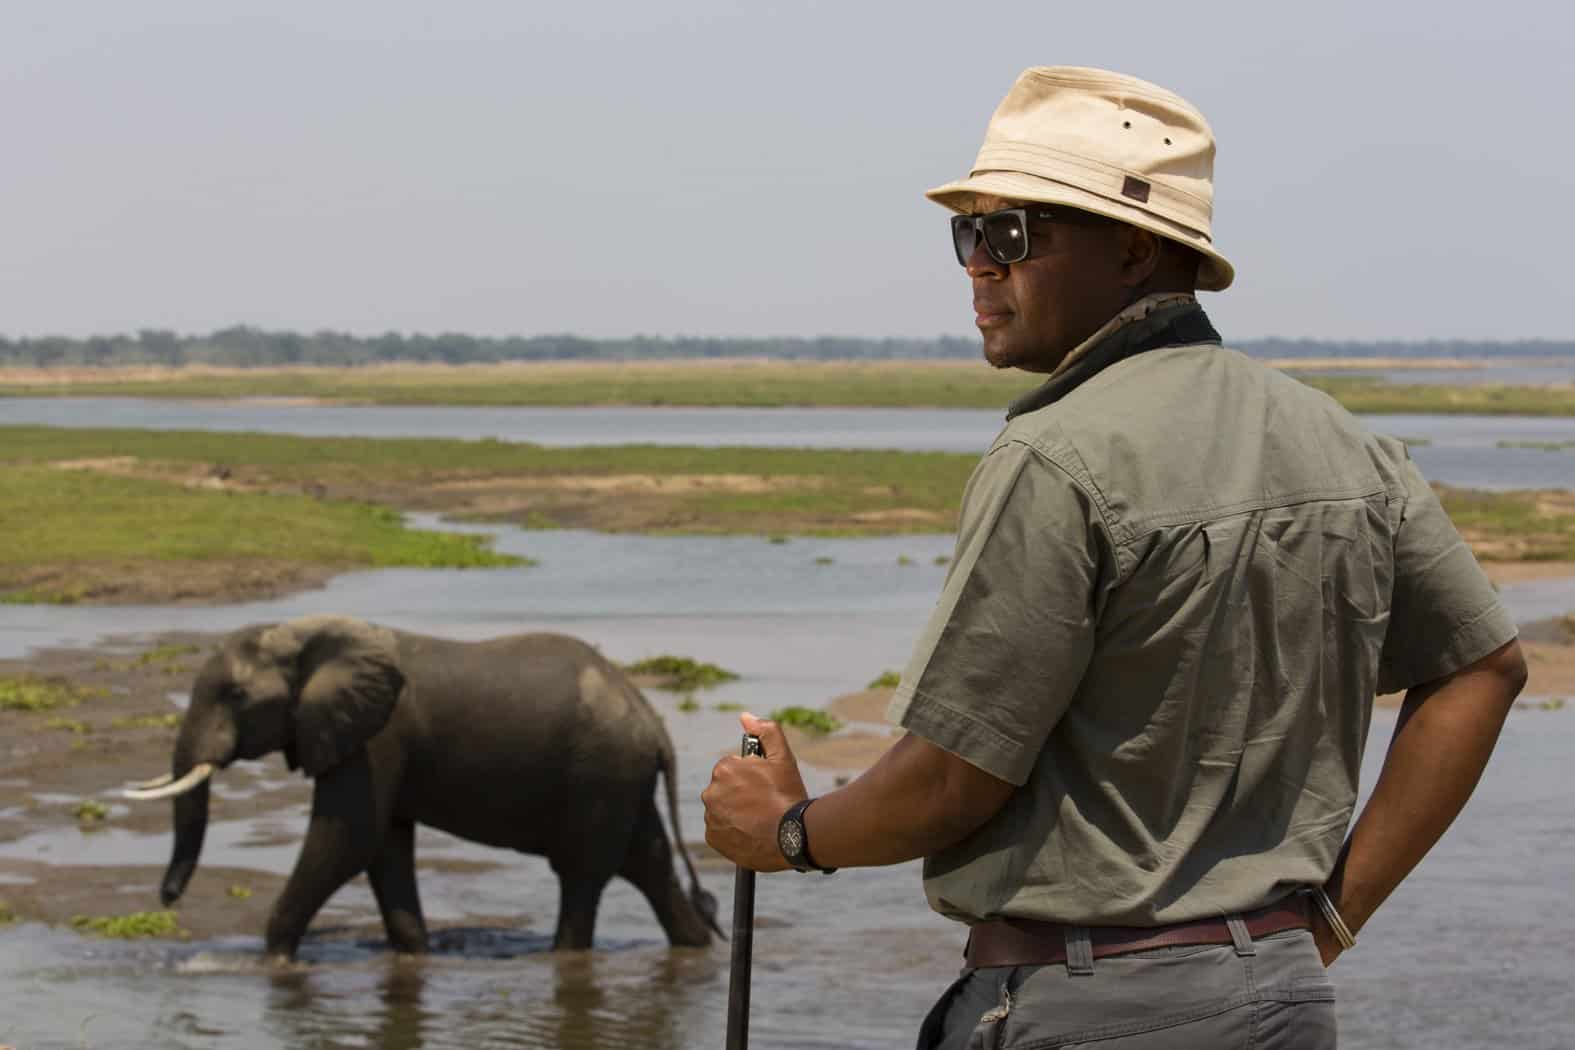 Beks Ndlovu watching an elephant wading in the flood plains in Africa.